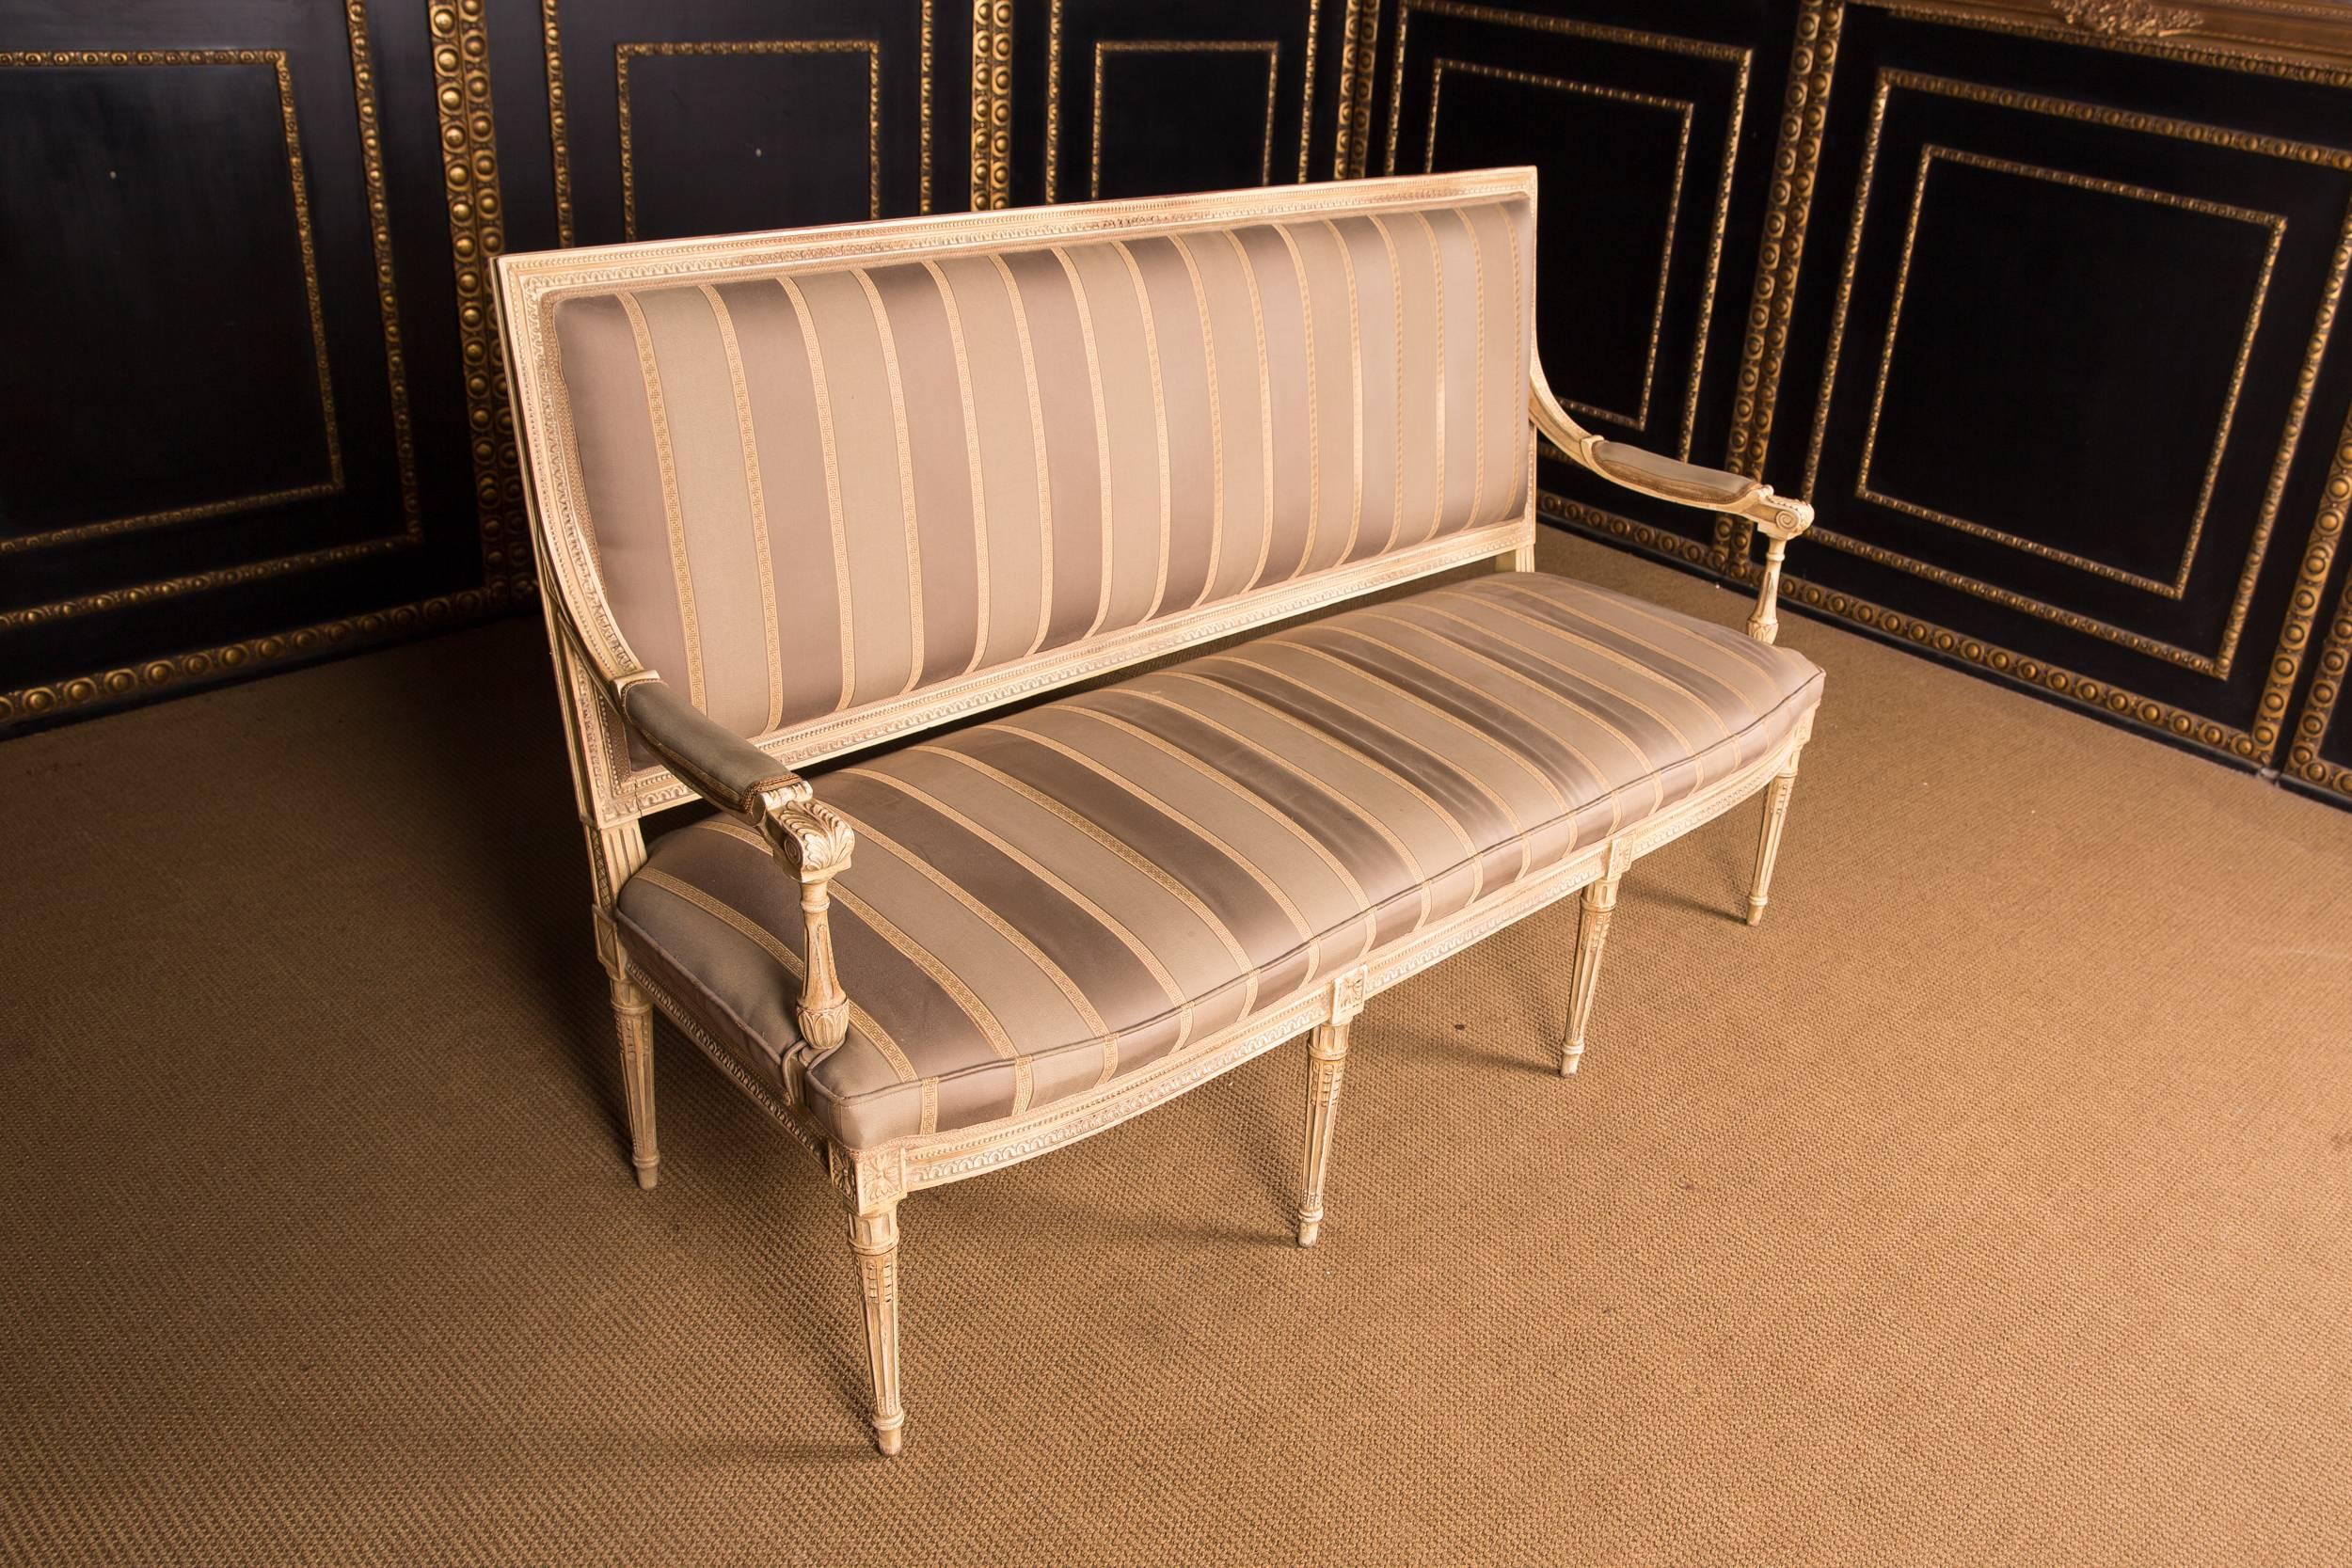 Hand-Carved High Quality Seating Furniture, Sofa  and Two Armchairs in the Louis Seize Style